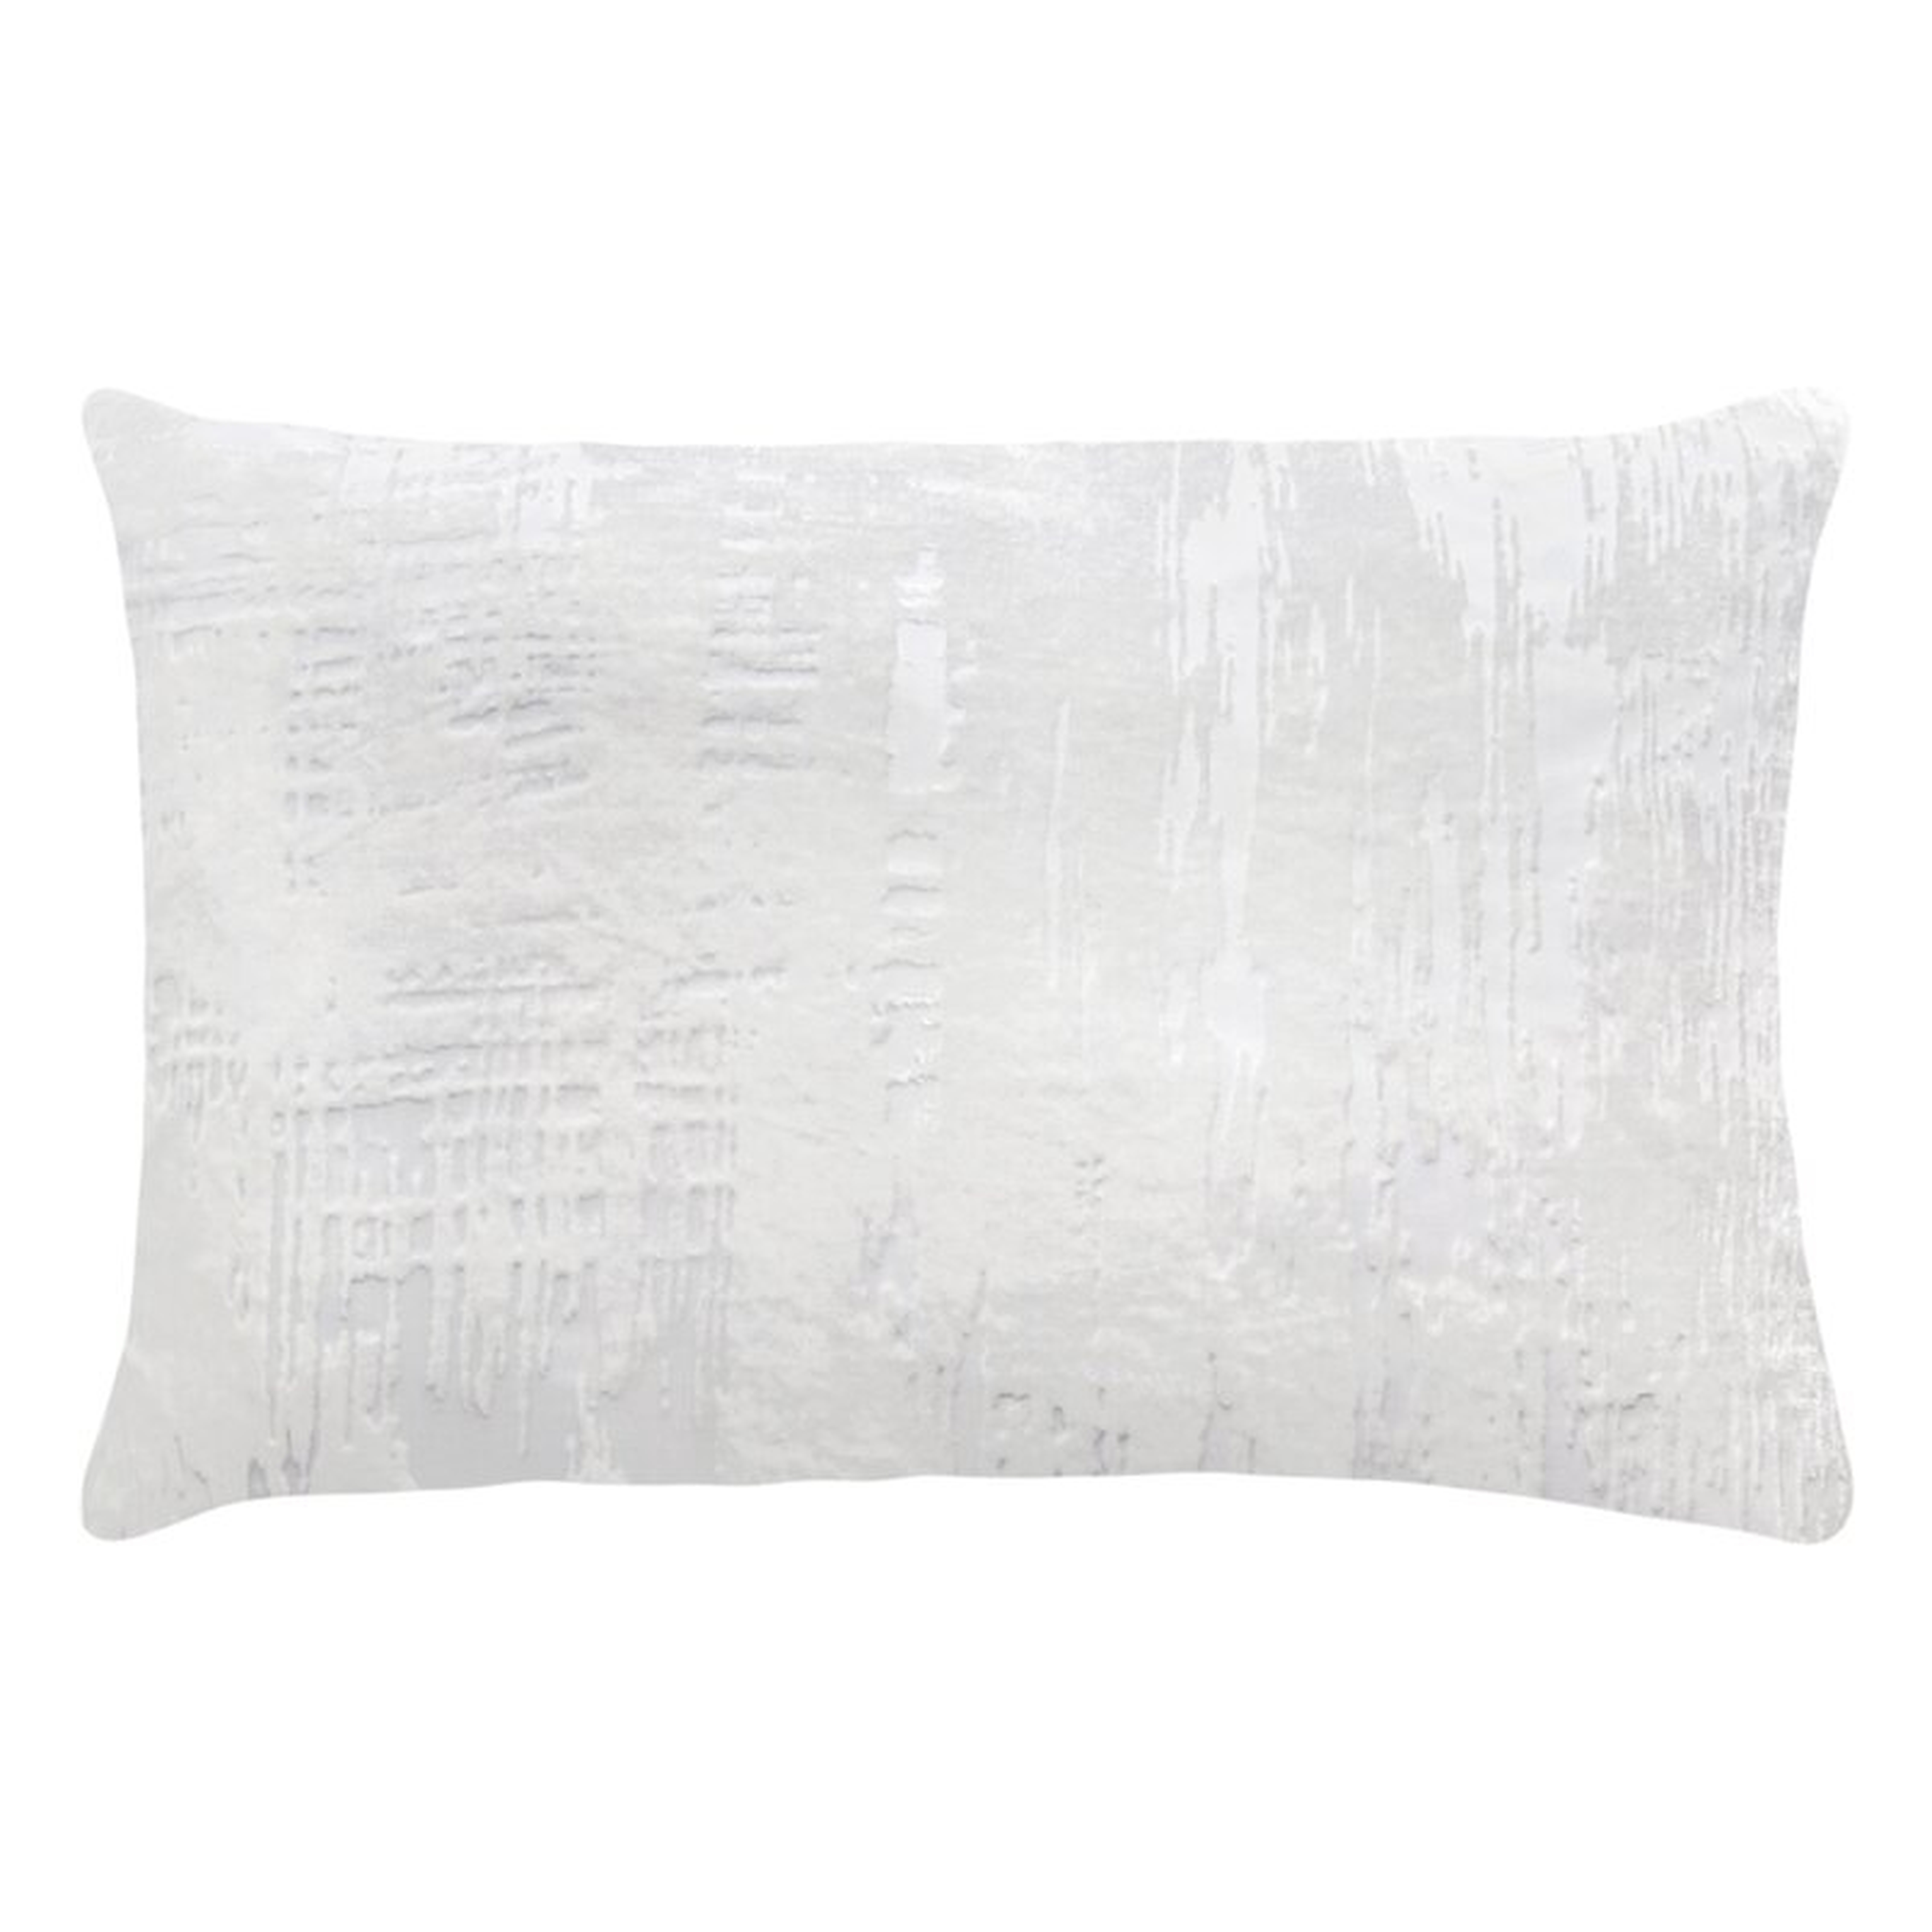 Kevin O'Brien Studio Brushstroke Down Abstract Lumbar Pillow Color: Ivory, Size: 14" x 20" - Perigold